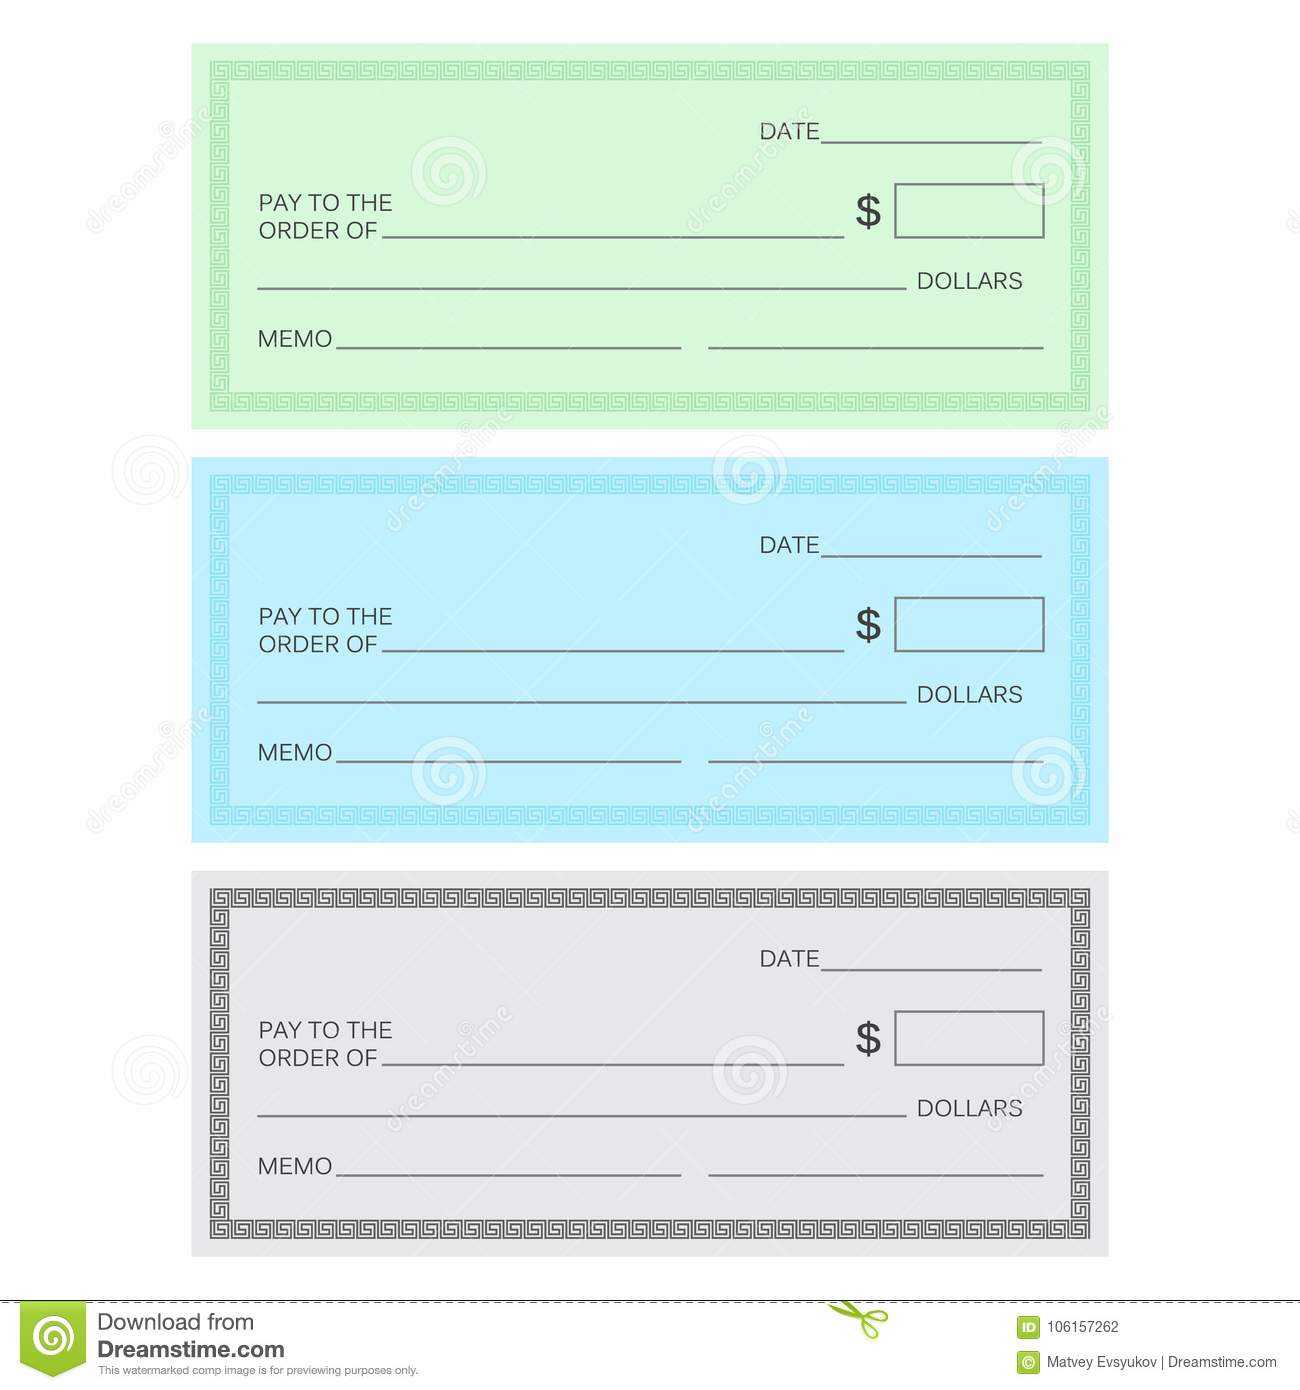 Blank Check Template. Check Template. Banking Check Templ Pertaining To Blank Business Check Template